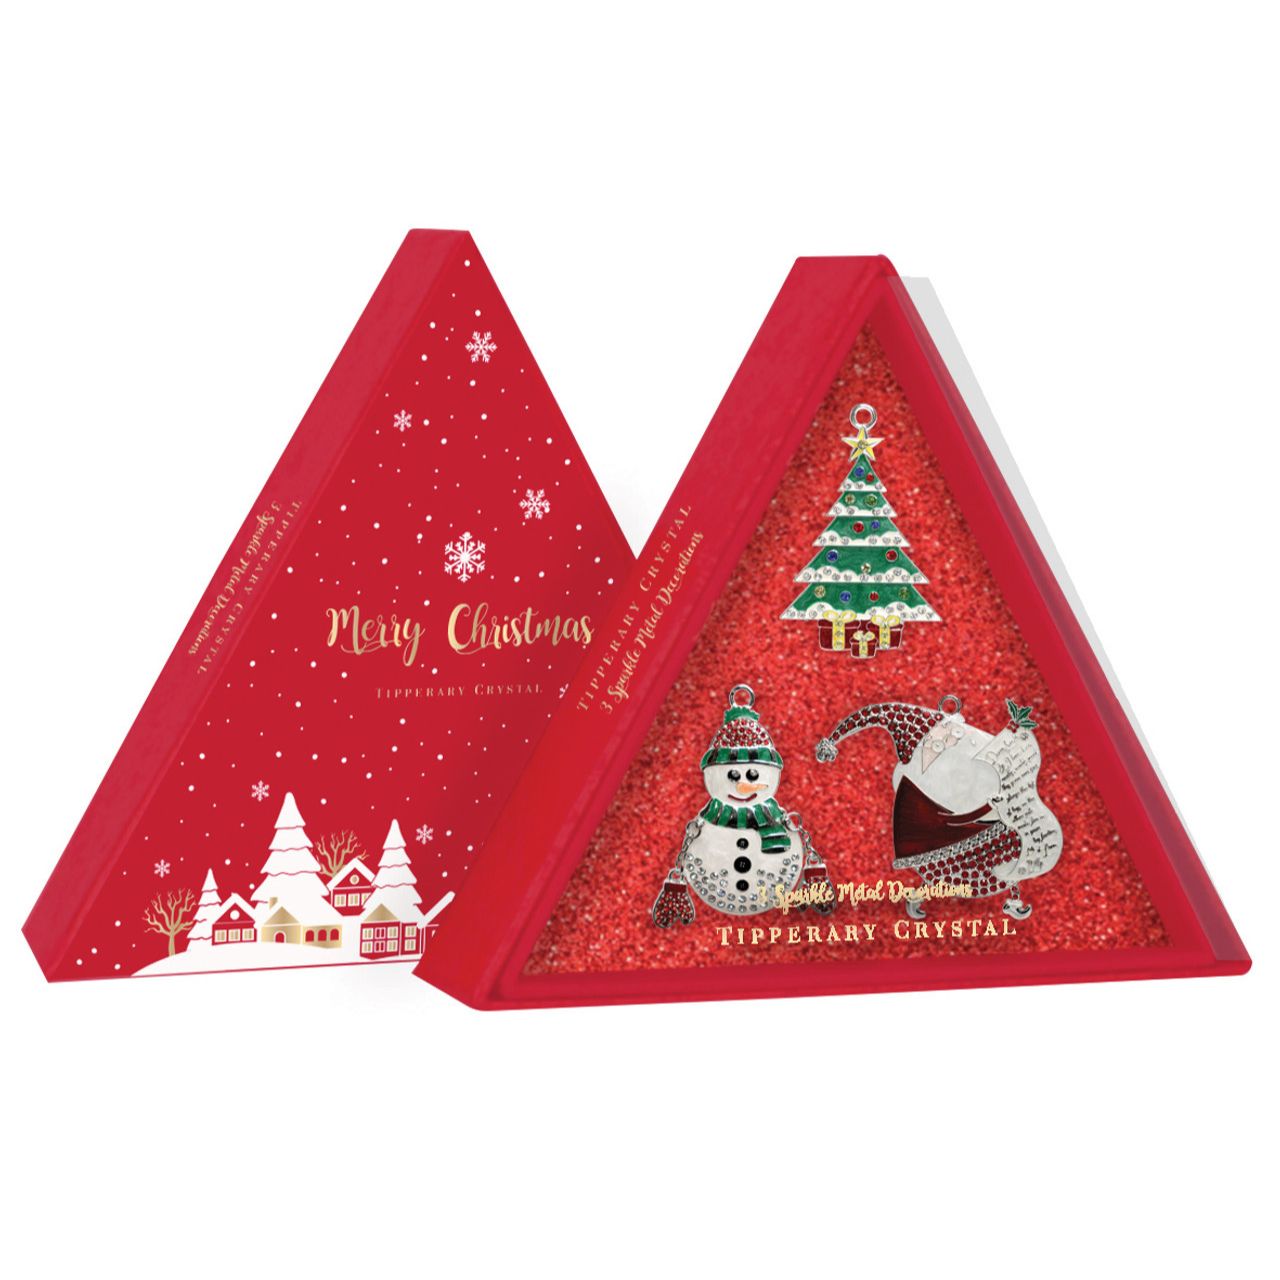 Sparkle Christmas Decorations Red Insert S/3 - Tree, Snowman & Santa - NEW 2022  We just Love Christmas! The festive season, the giving of gifts, creating memories and being together with family and loved ones. Have lots of fun with our lovingly designed and created Christmas decorations, each one has a magic sparkle of elf dust!